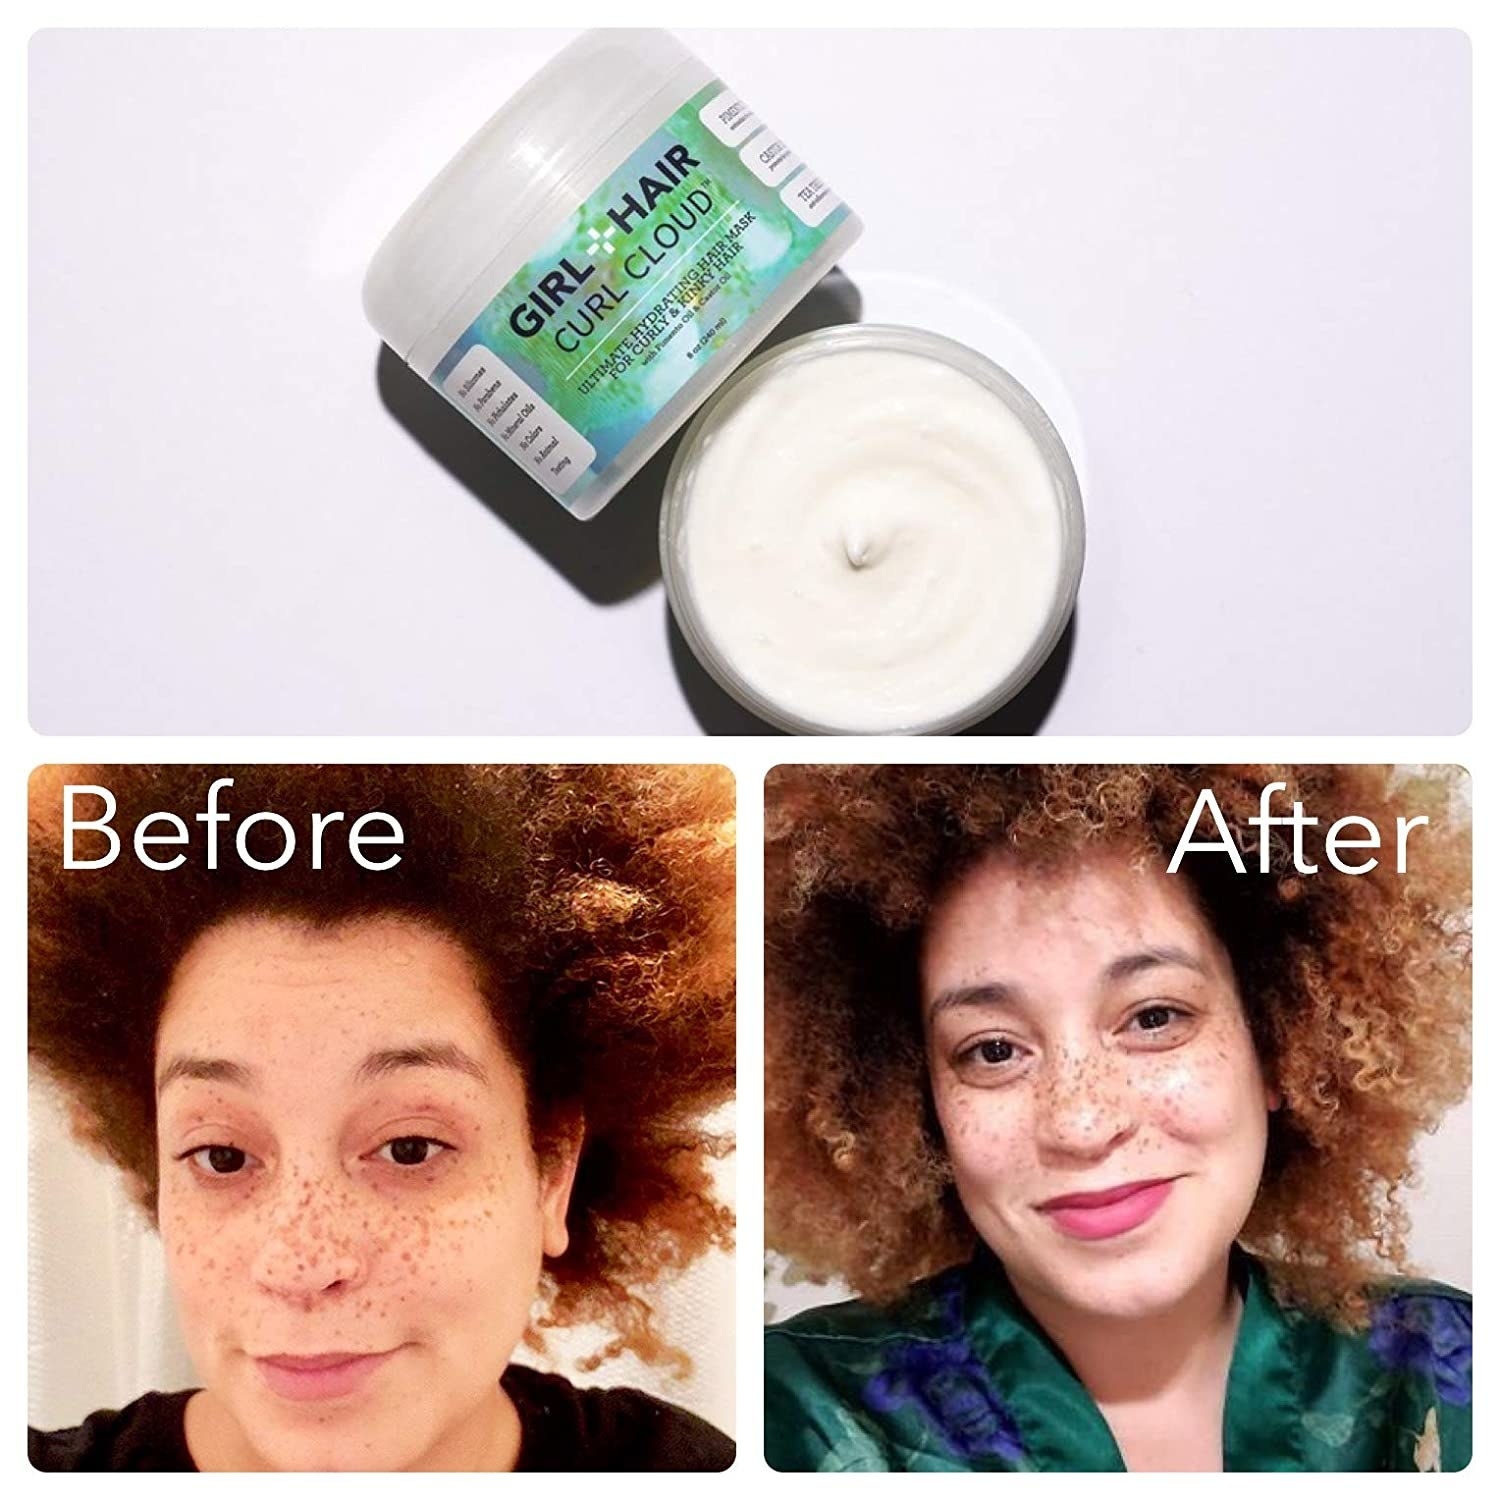 the cloud hair product sat about a before and after image of a user showing much more defined curls after use